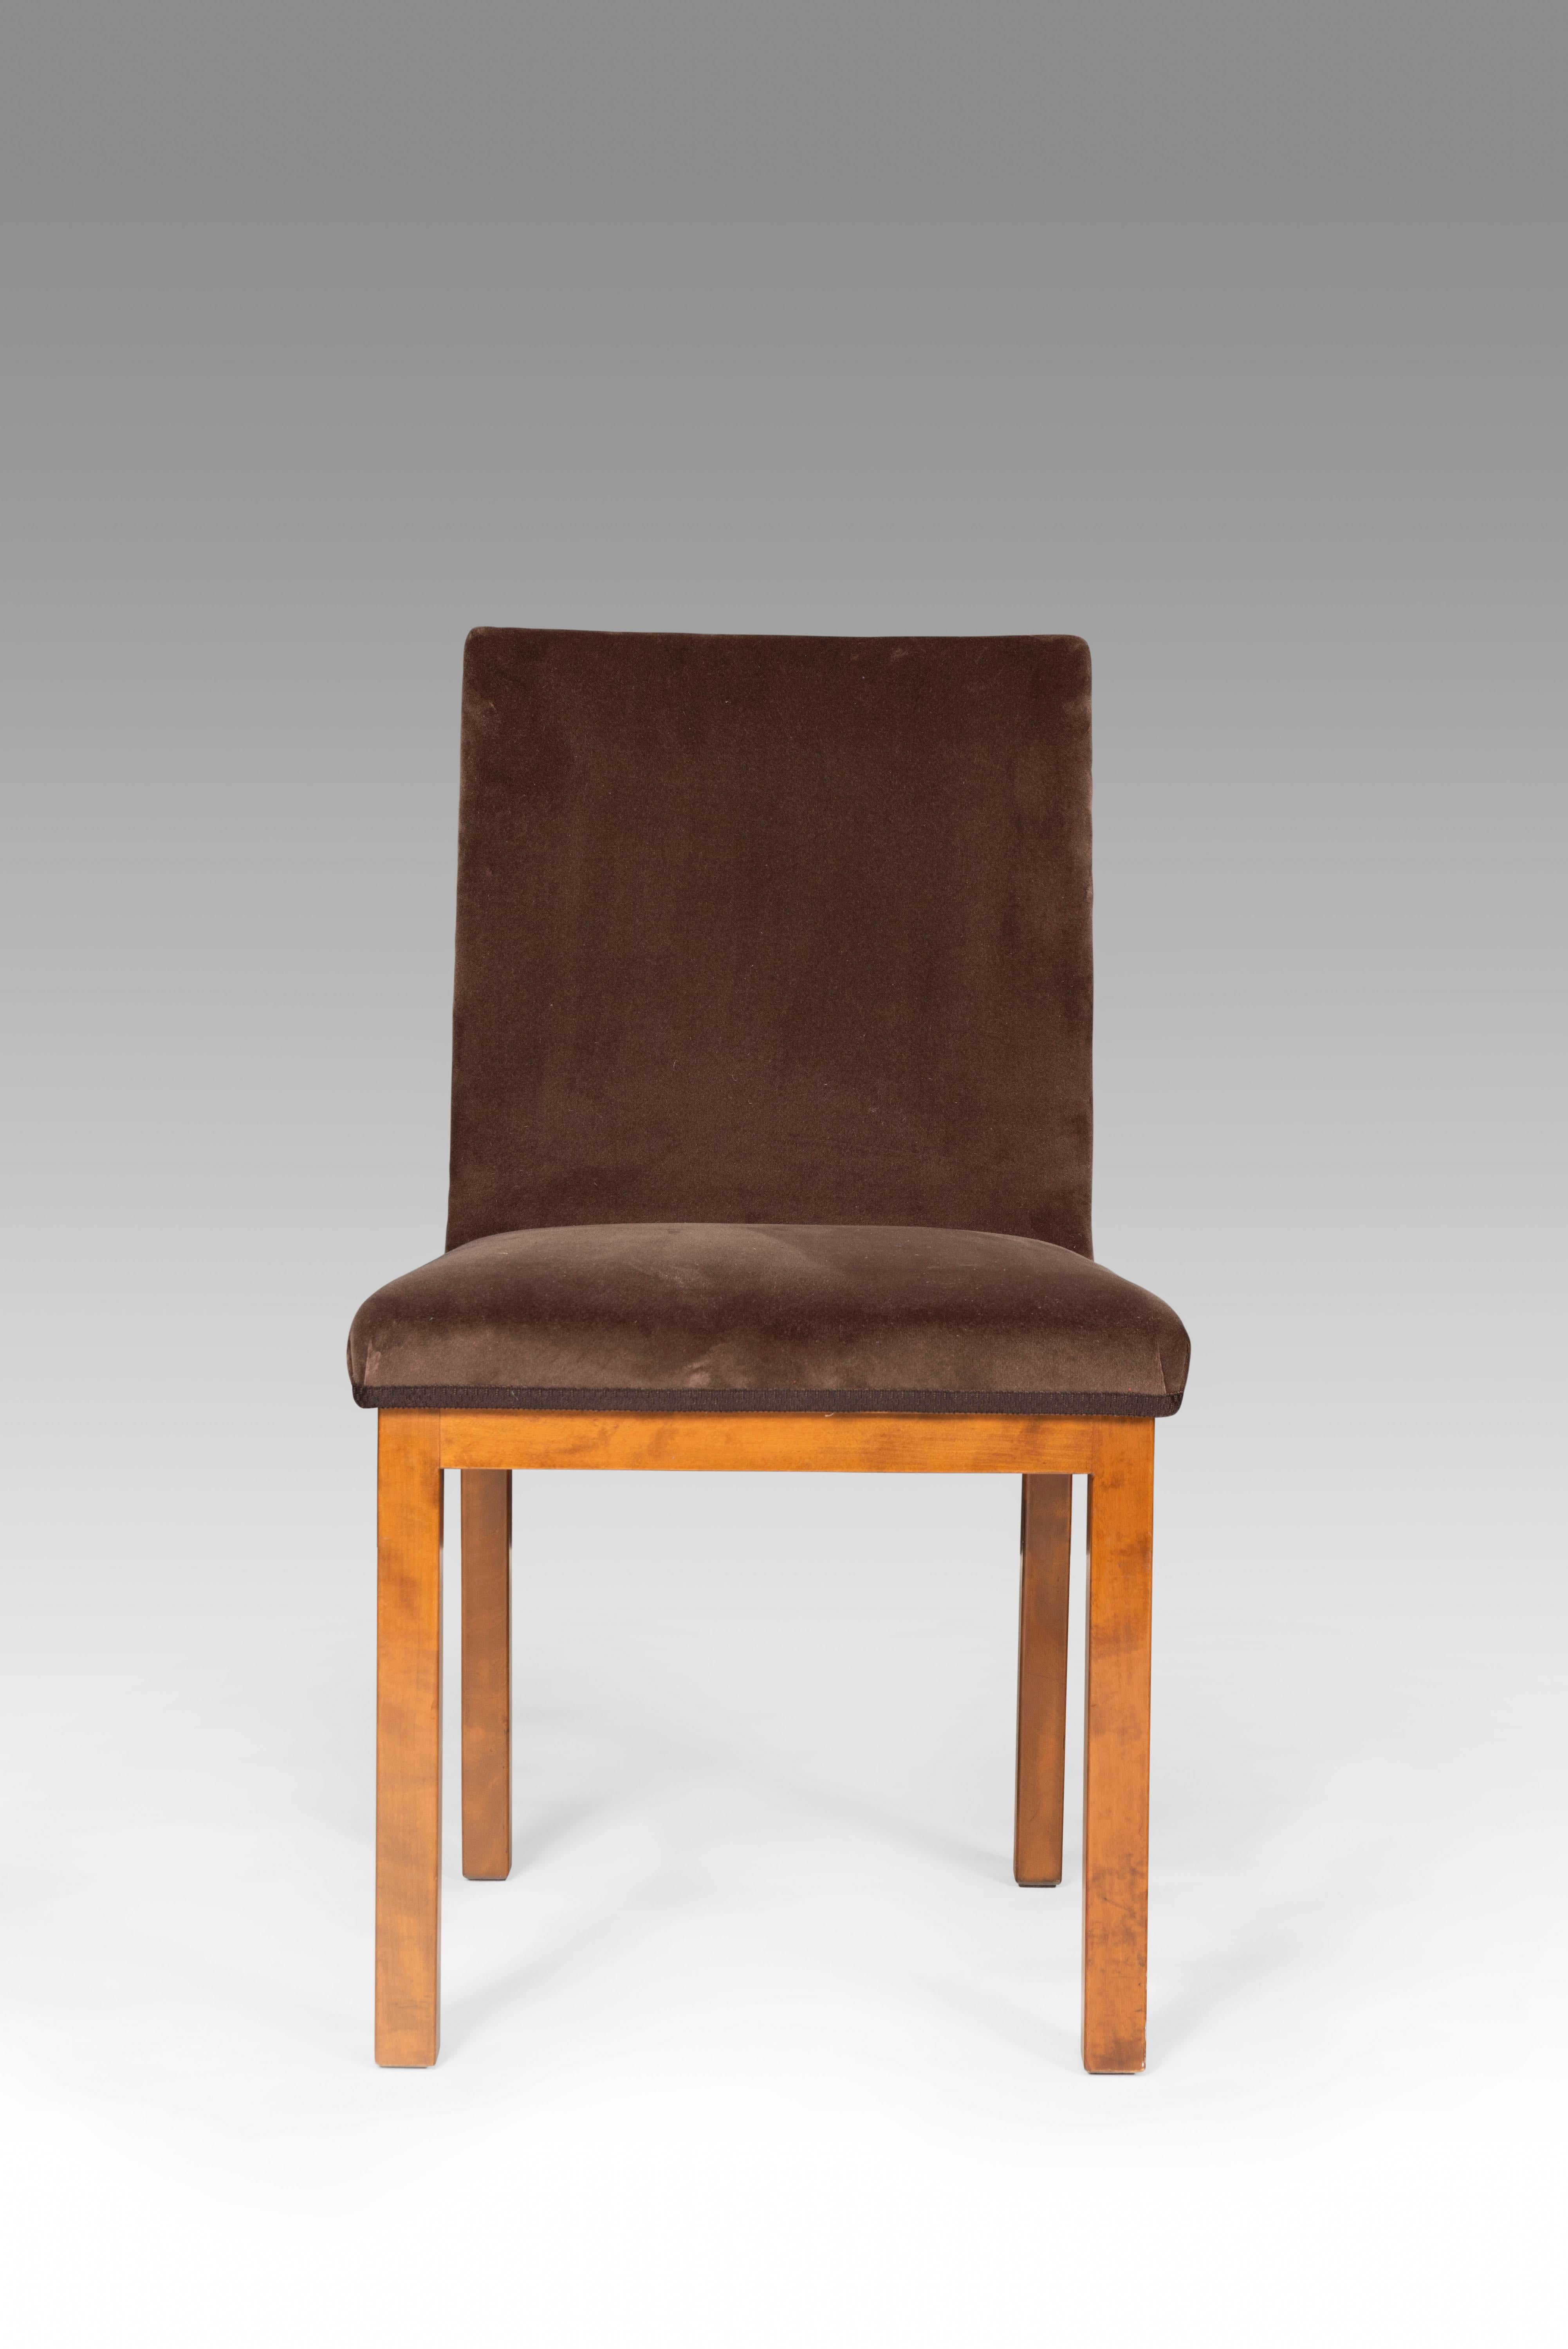 Axel Einar Hjorth Corall Set of 4 Chairs Birch and Velvet 1934 In Good Condition For Sale In Uccle, BE